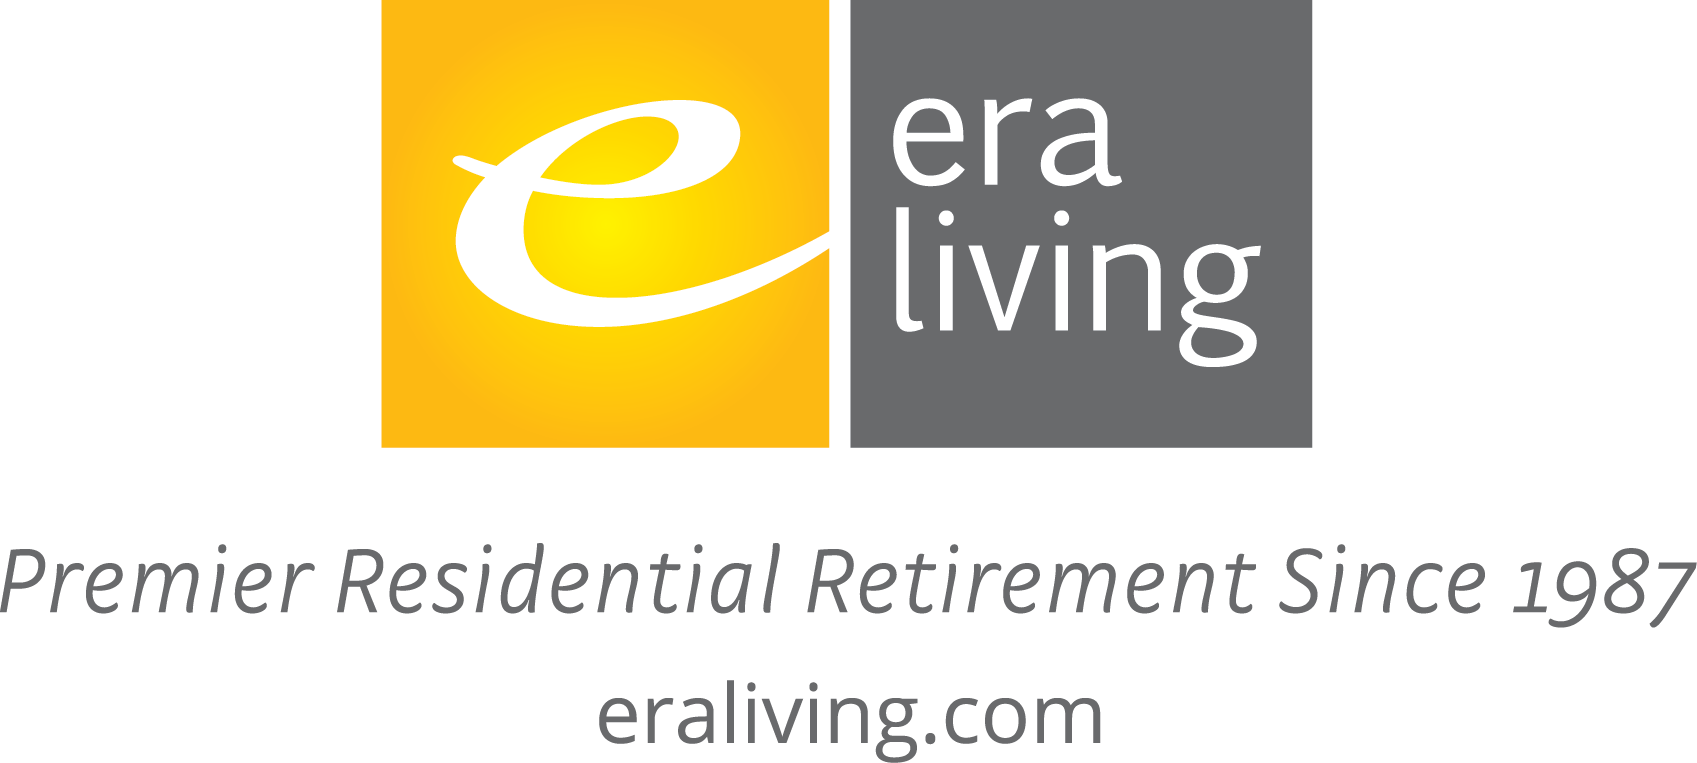 Seattle Area Retirement Communities, Independent, Assisted Living, and Continuing Care